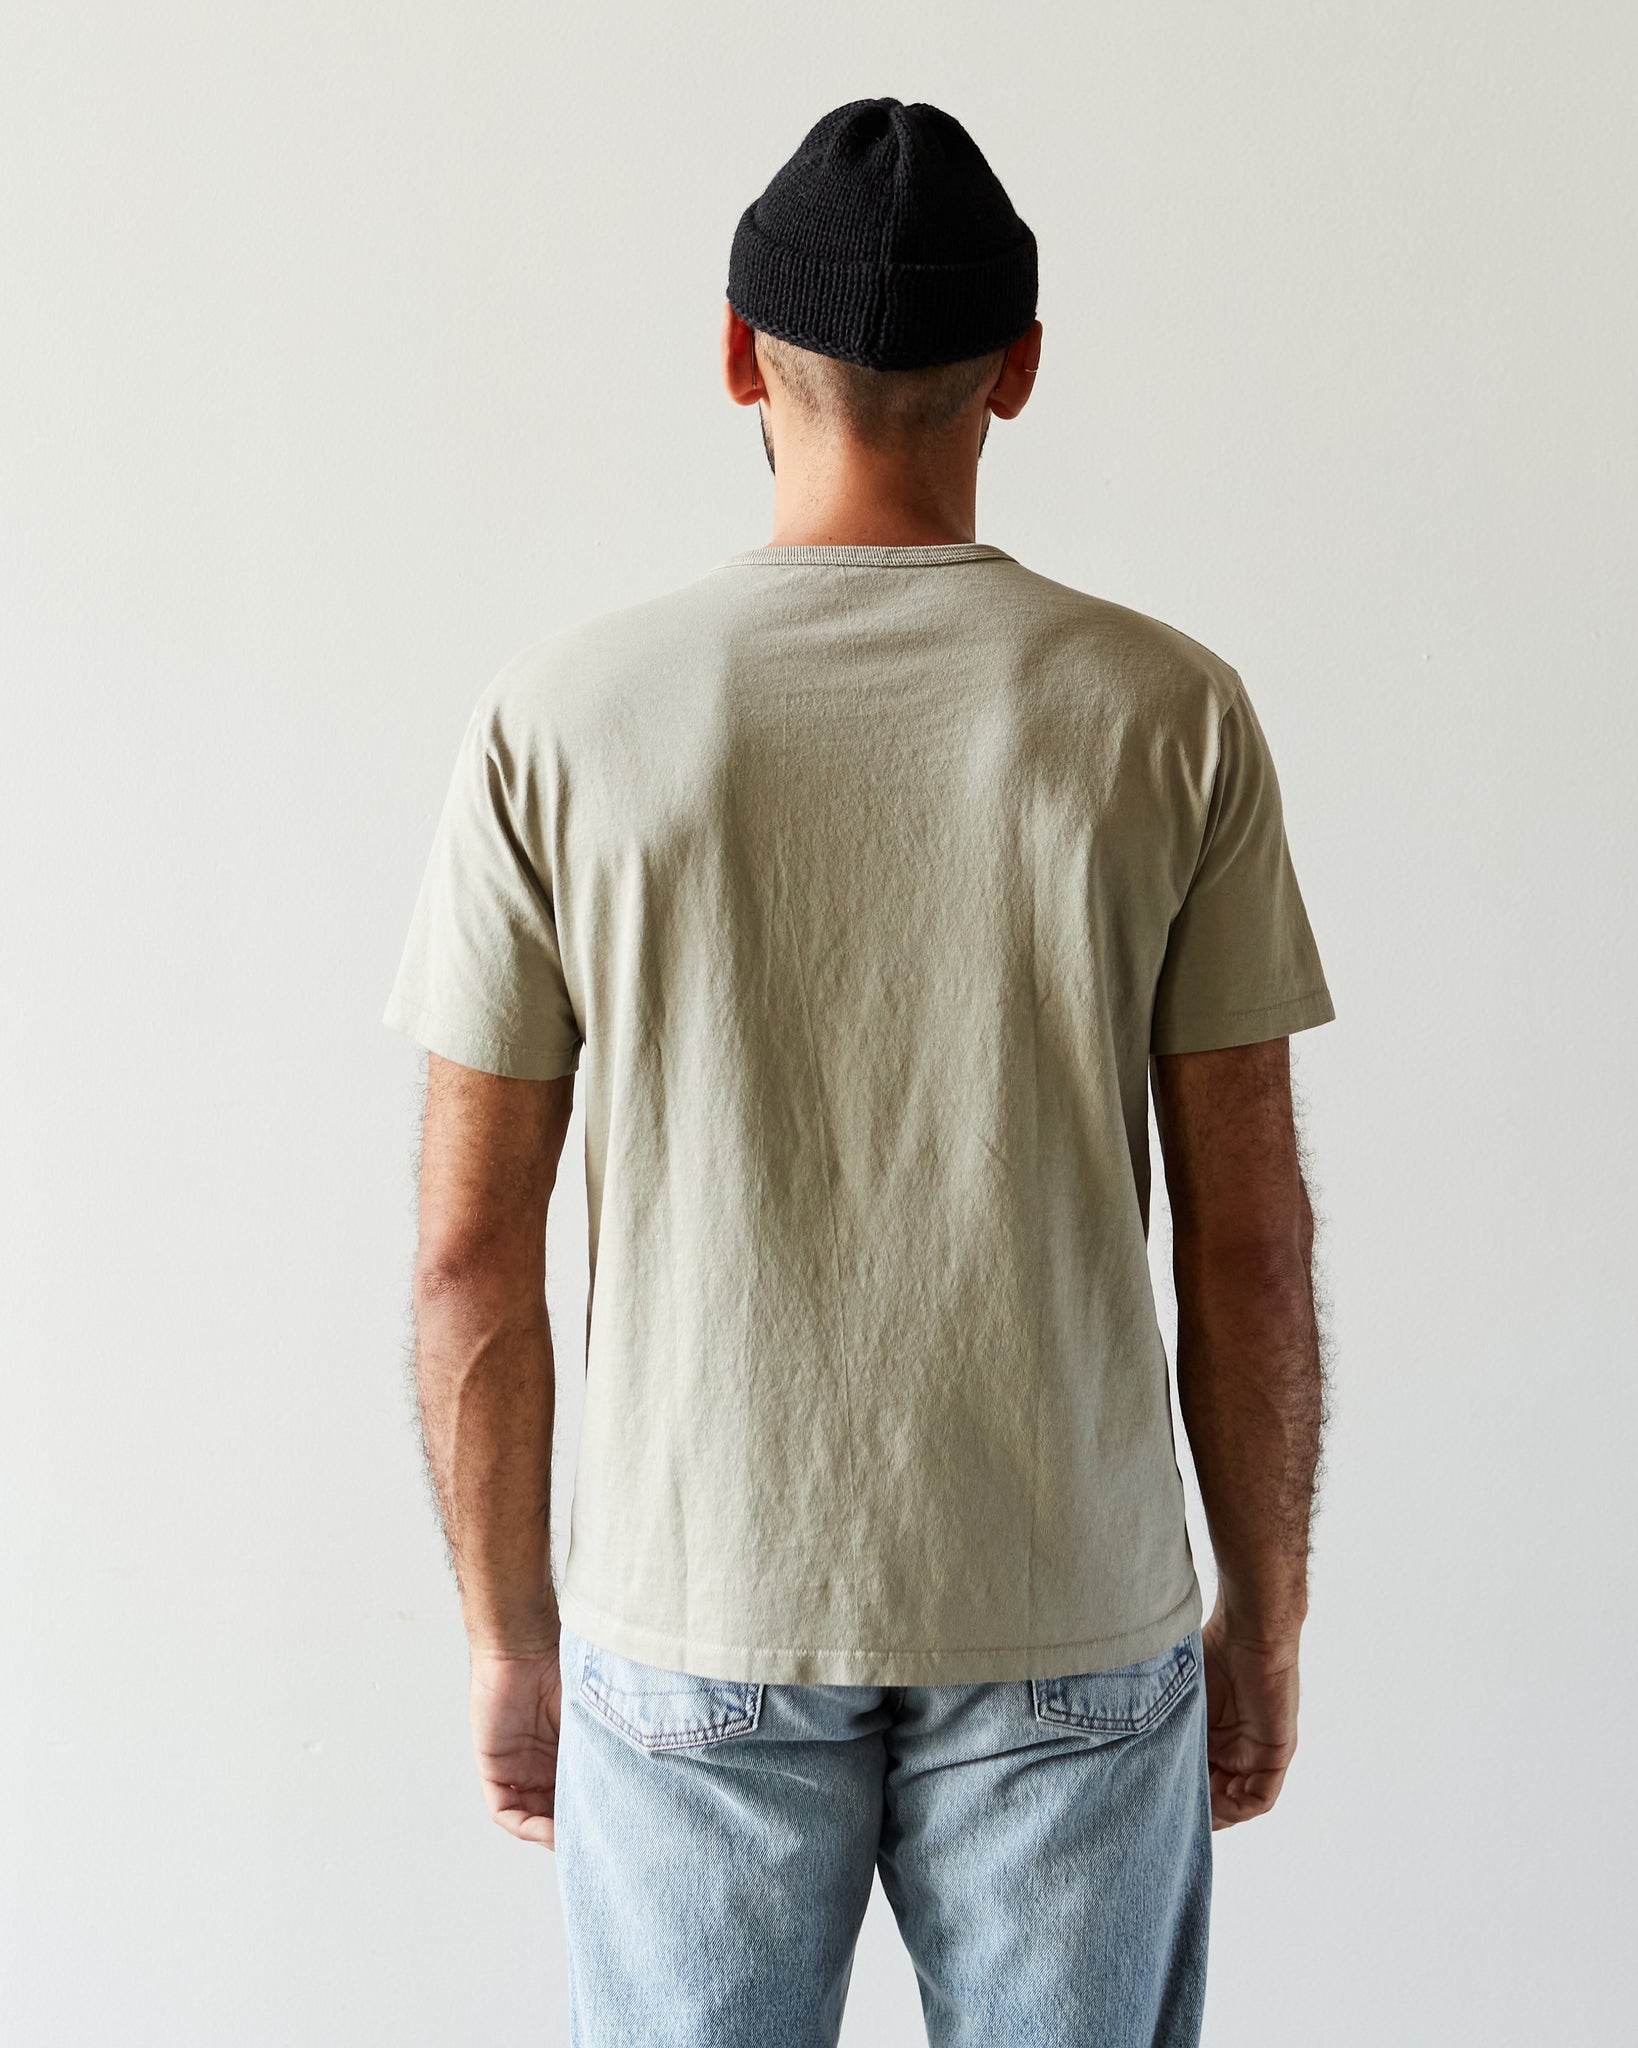 Lady White Our T-Shirt, Taupe Fog